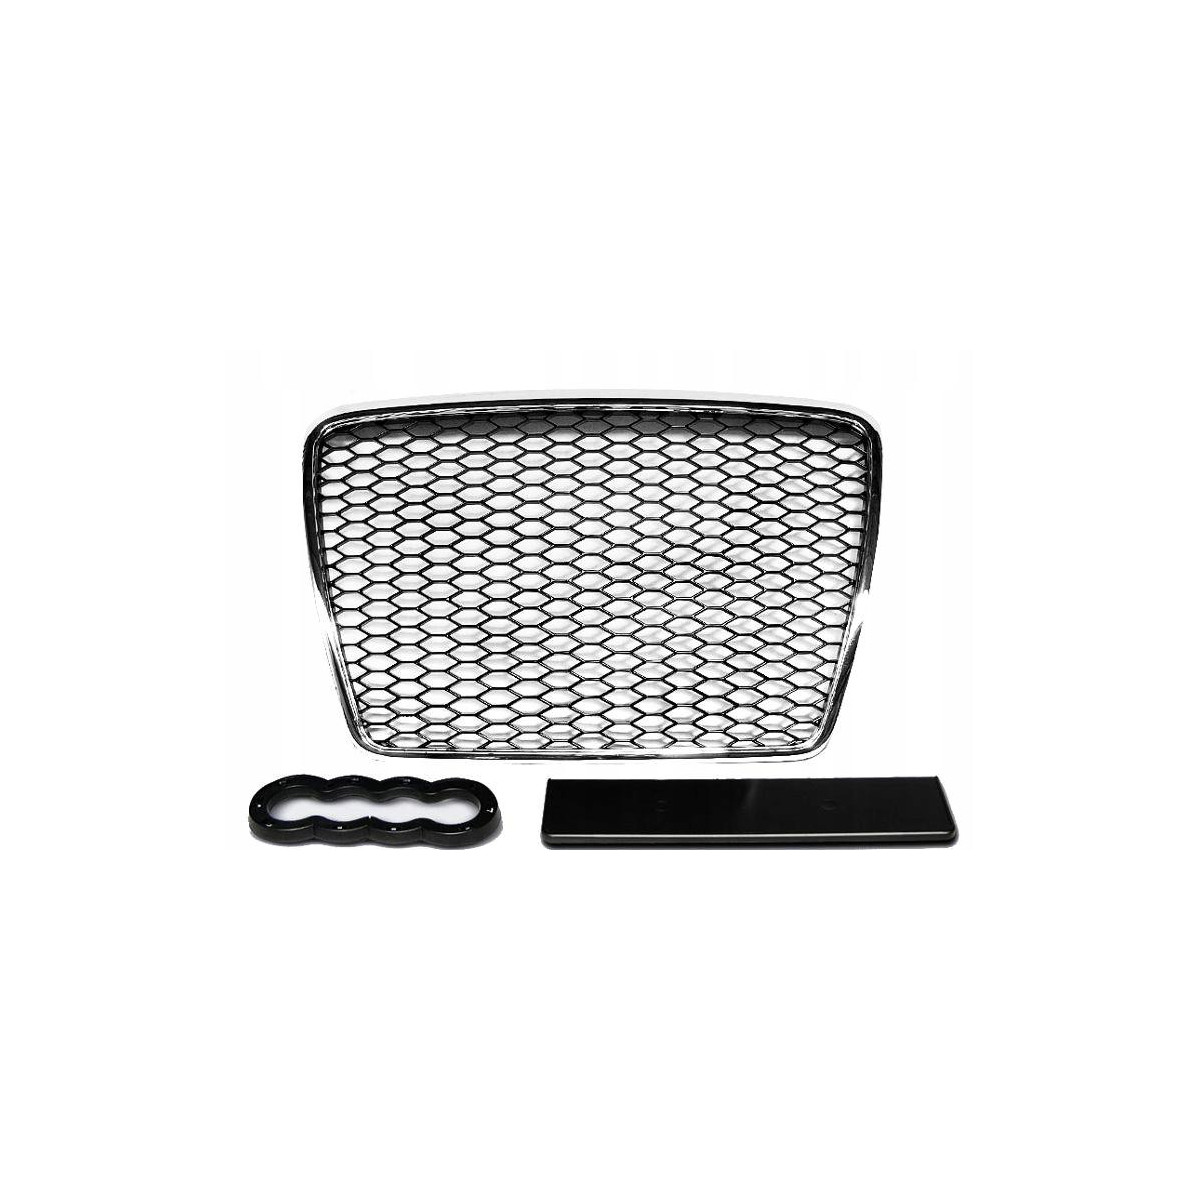 GRILL AUDI A6 C6 09-11 CHROME RS-STYLE